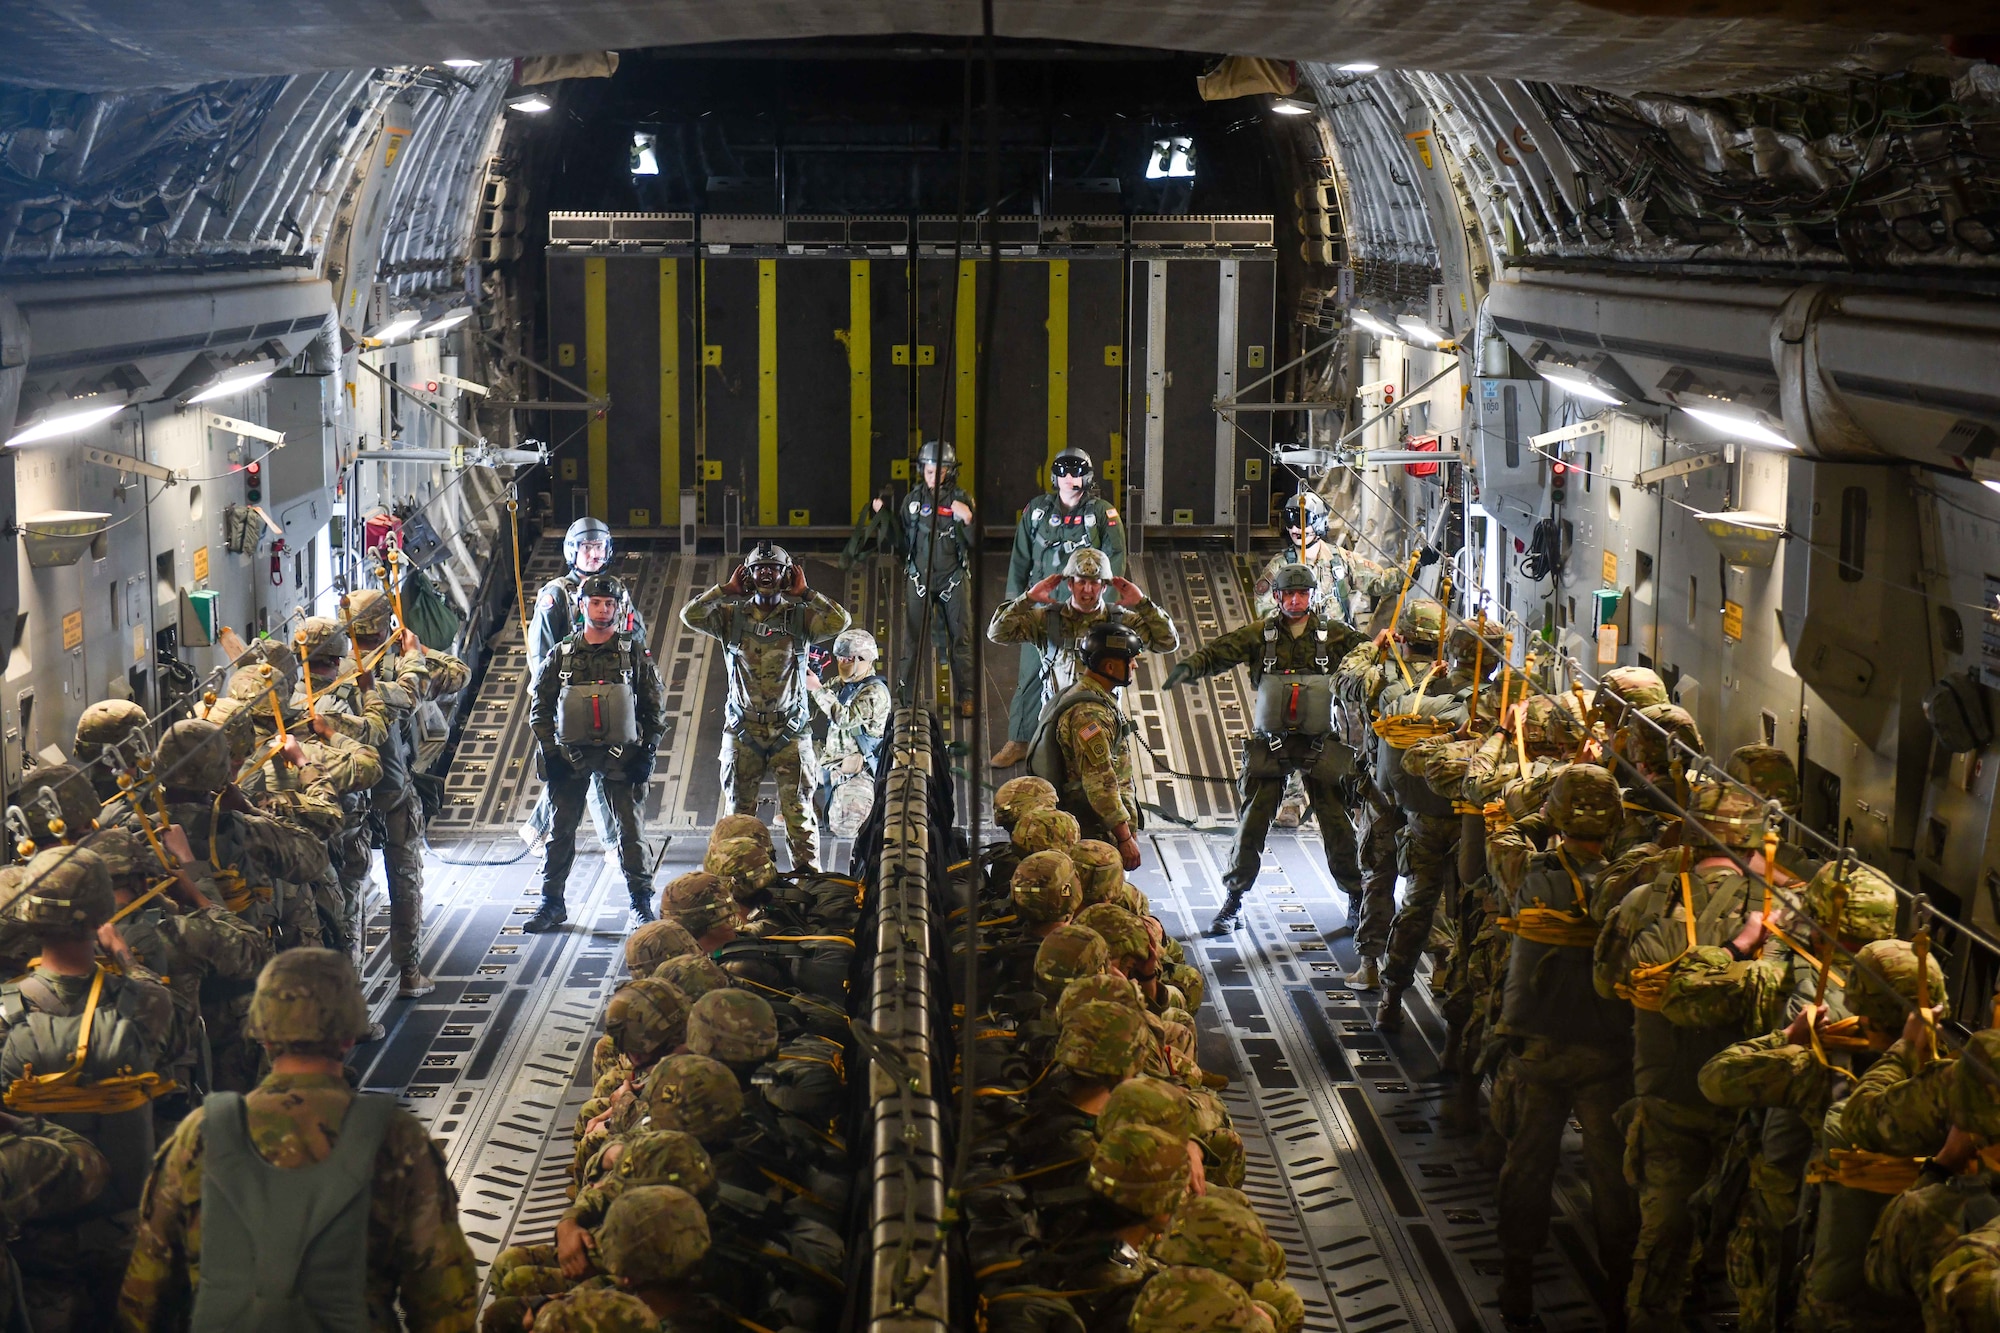 Jumpmasters from both the U.S. and Poland brief the military members how much time they have until their jump over the Sicily Drop Zone near Fayetteville, North Carolina, Dec. 8, 2022. Everyone participating in the jumps for Operation Toy Drop brought toys to donate to children to open during the holiday season. (U.S. Air Force photo by Airman 1st Class Kari Degraffenreed)